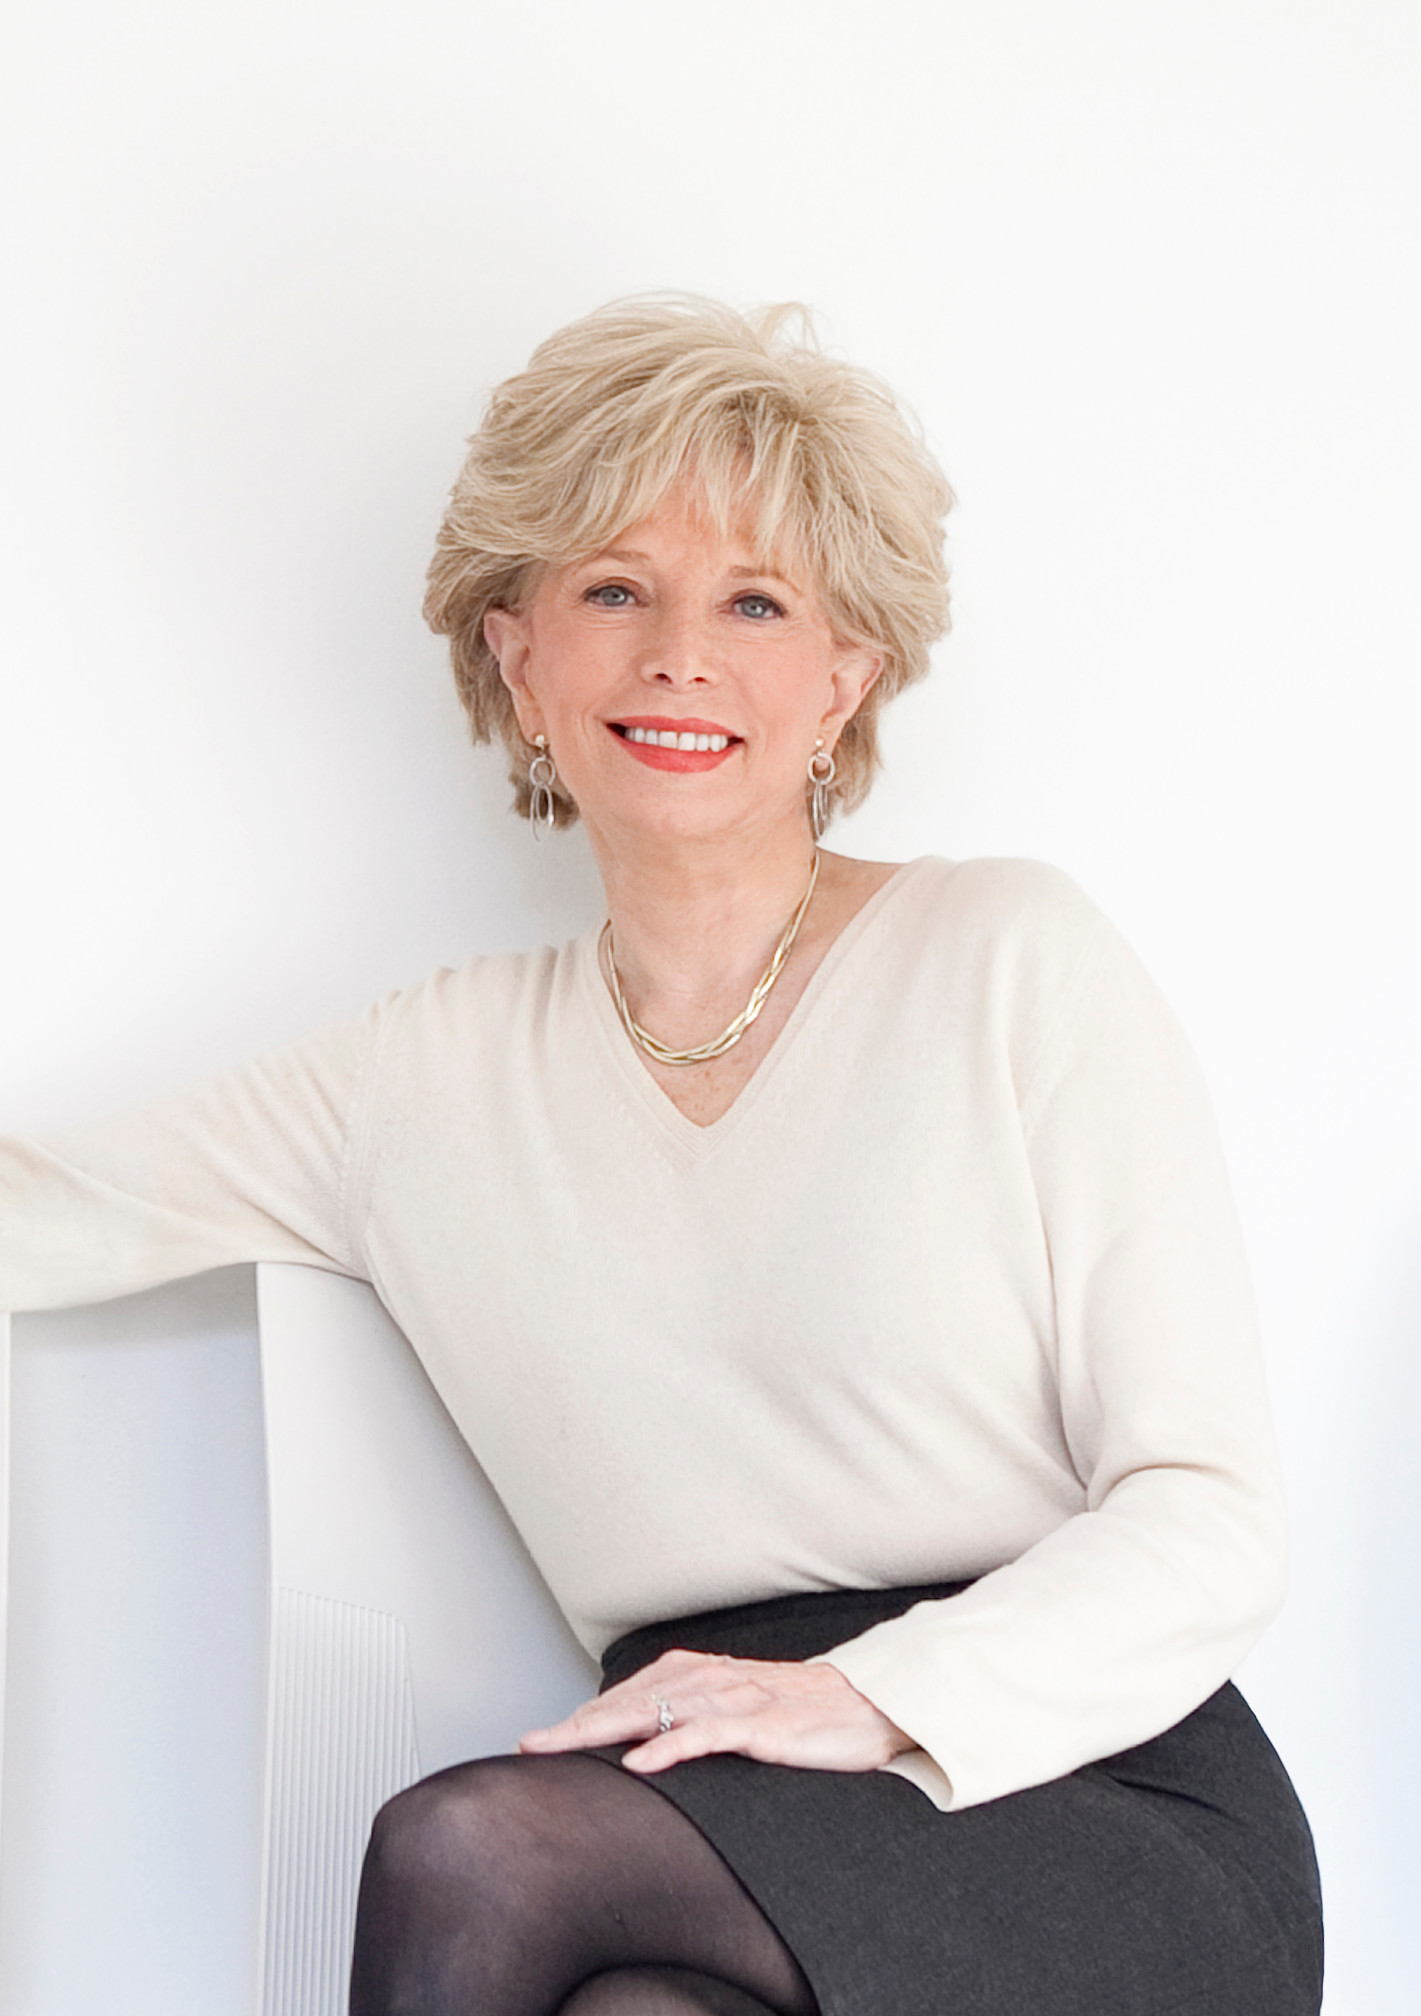 "60 Minute"s correspondent Lesley Stahl, who has covered the White House and interviewed heads of state, shares her very personal journey in her new book.